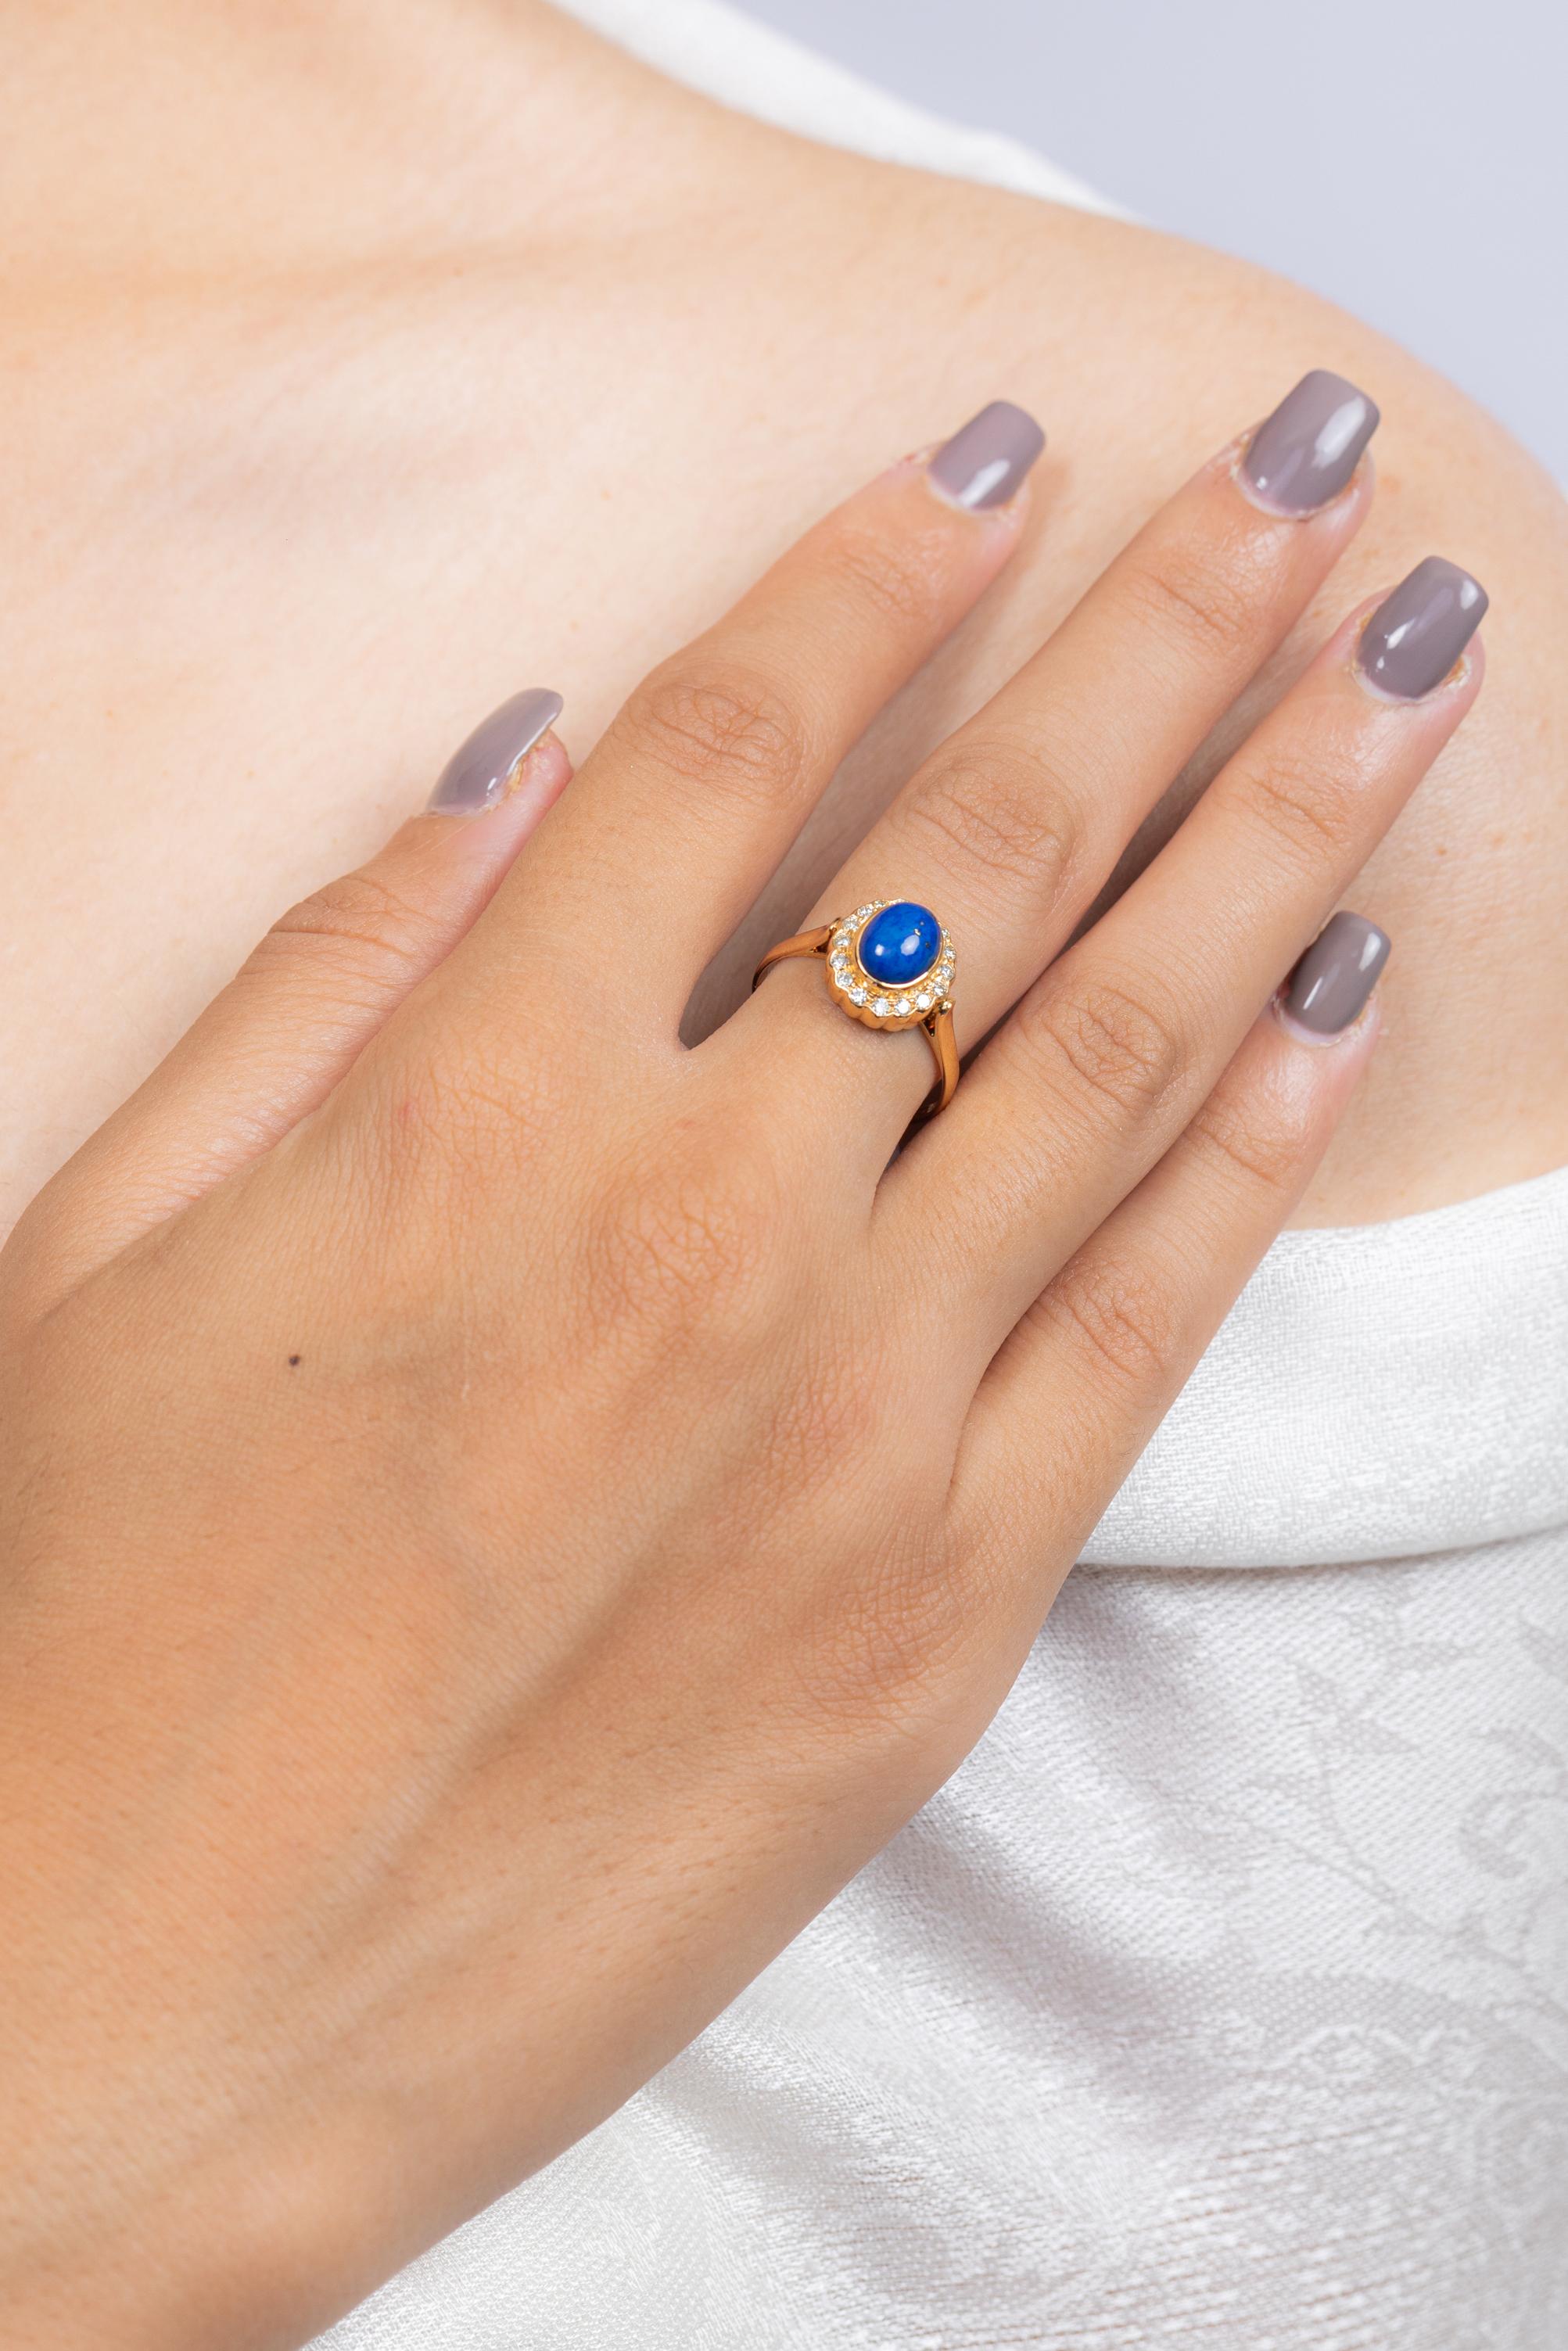 For Sale:  18K Yellow Gold 1.15 Carat Lapis Lazuli with Halo Diamond Cocktail Ring 6